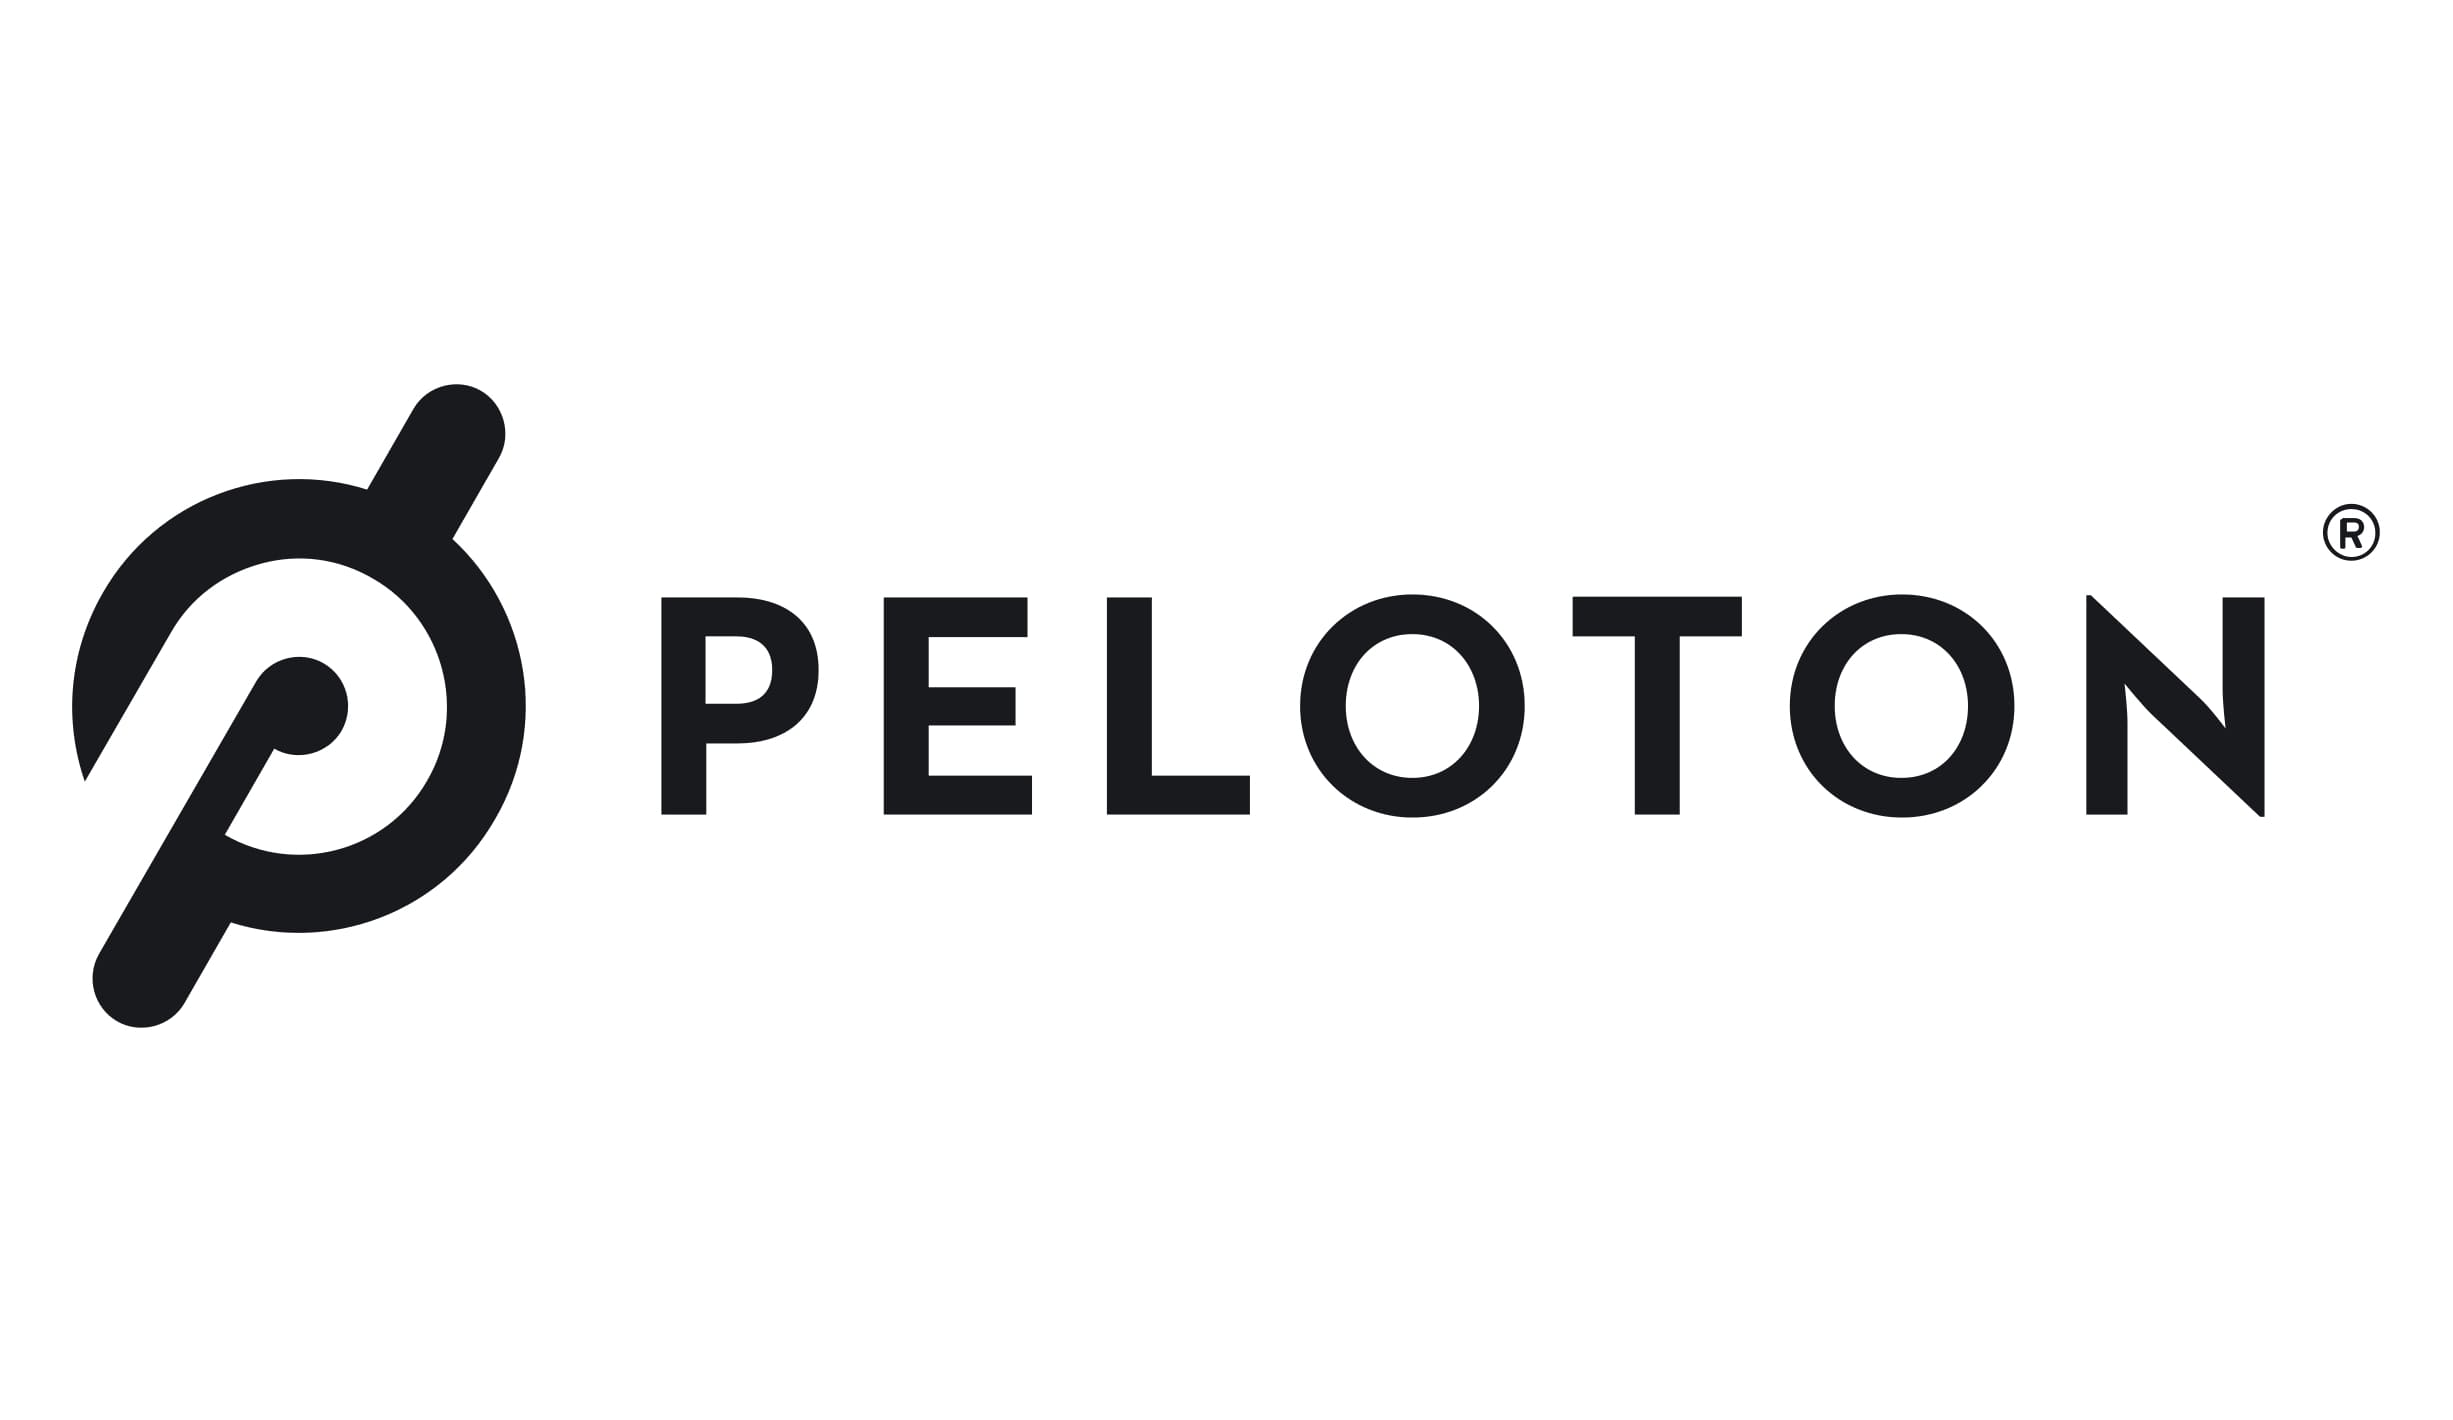 How to Get the Peloton App+ for Half Price, $12.99/month Instead of $24/month